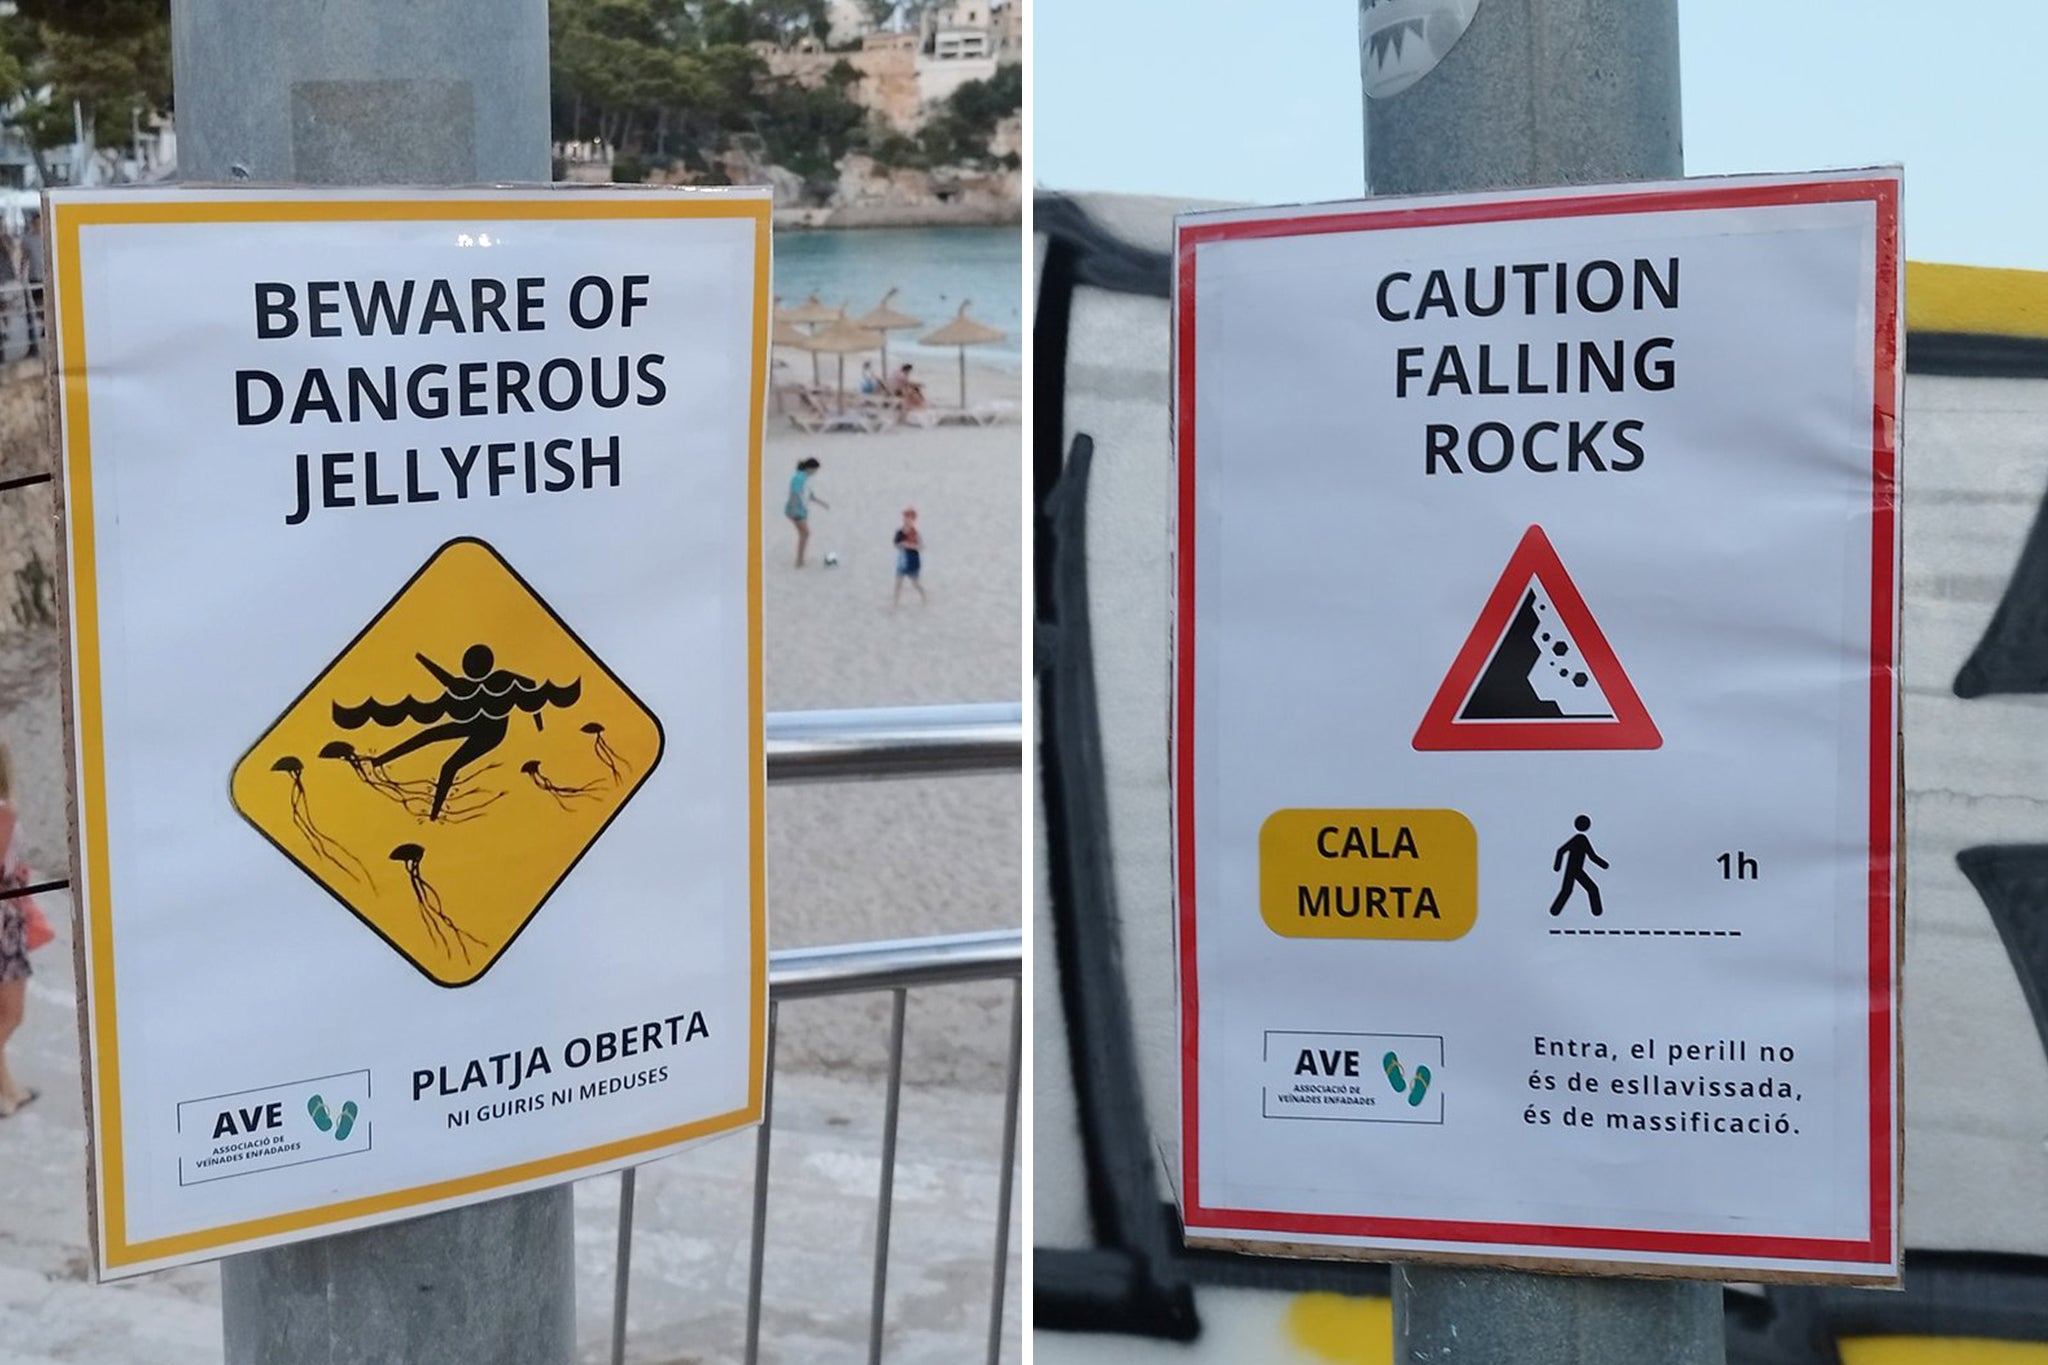 Access to some of Mallorca’s beaches called into question by unofficial signs